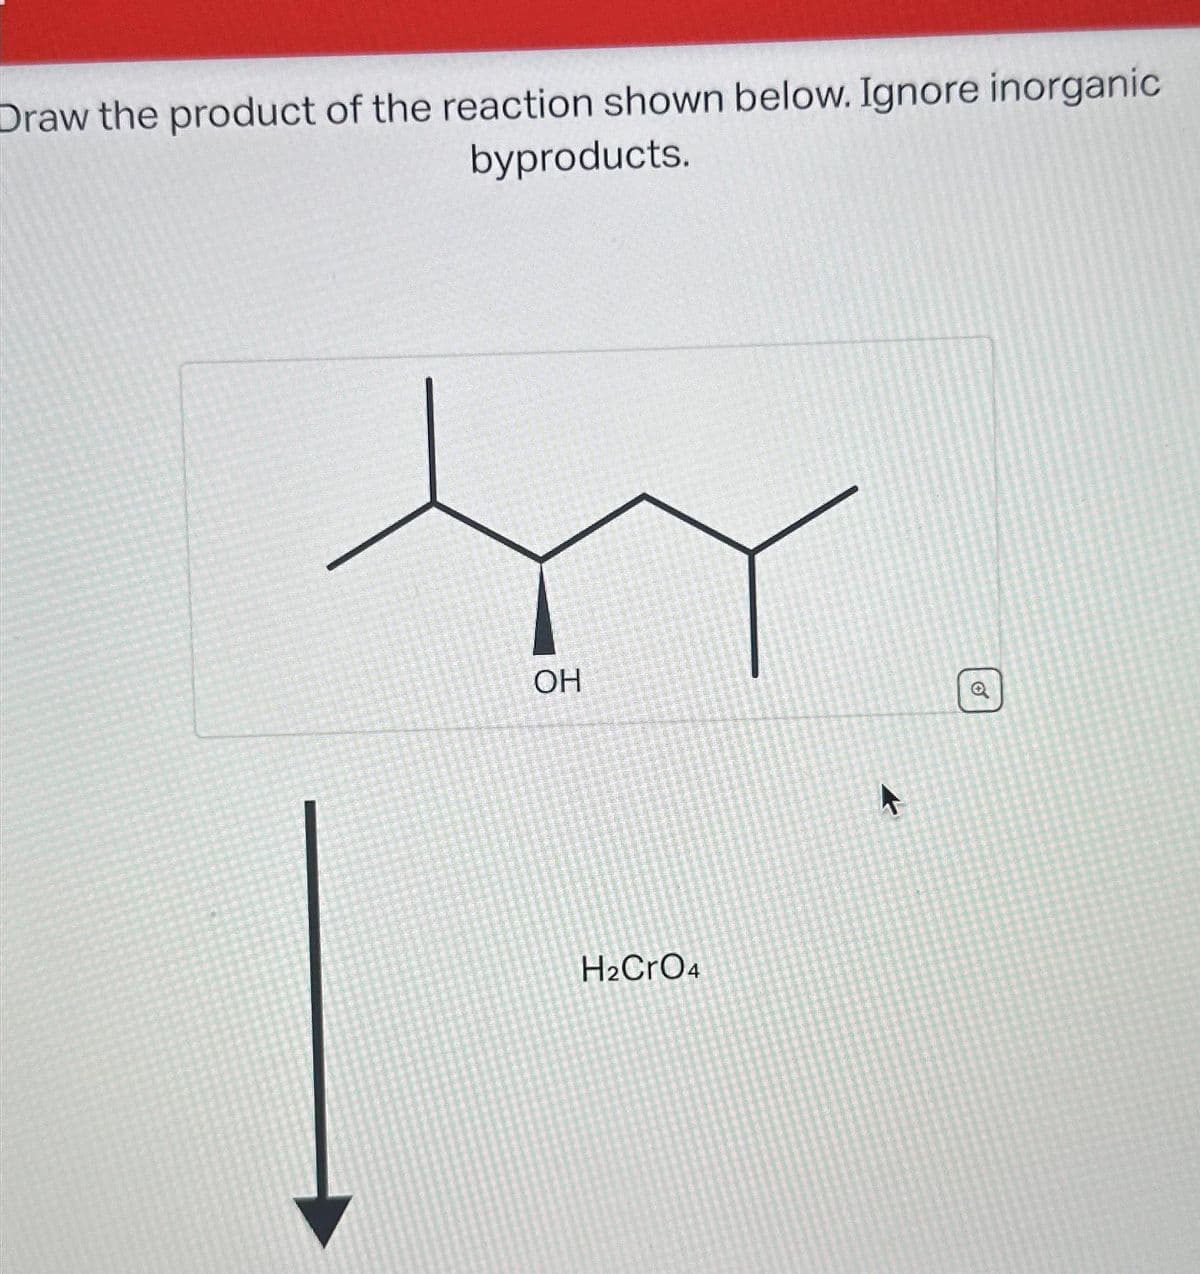 Draw the product of the reaction shown below. Ignore inorganic
byproducts.
OH
H₂CrO4
o